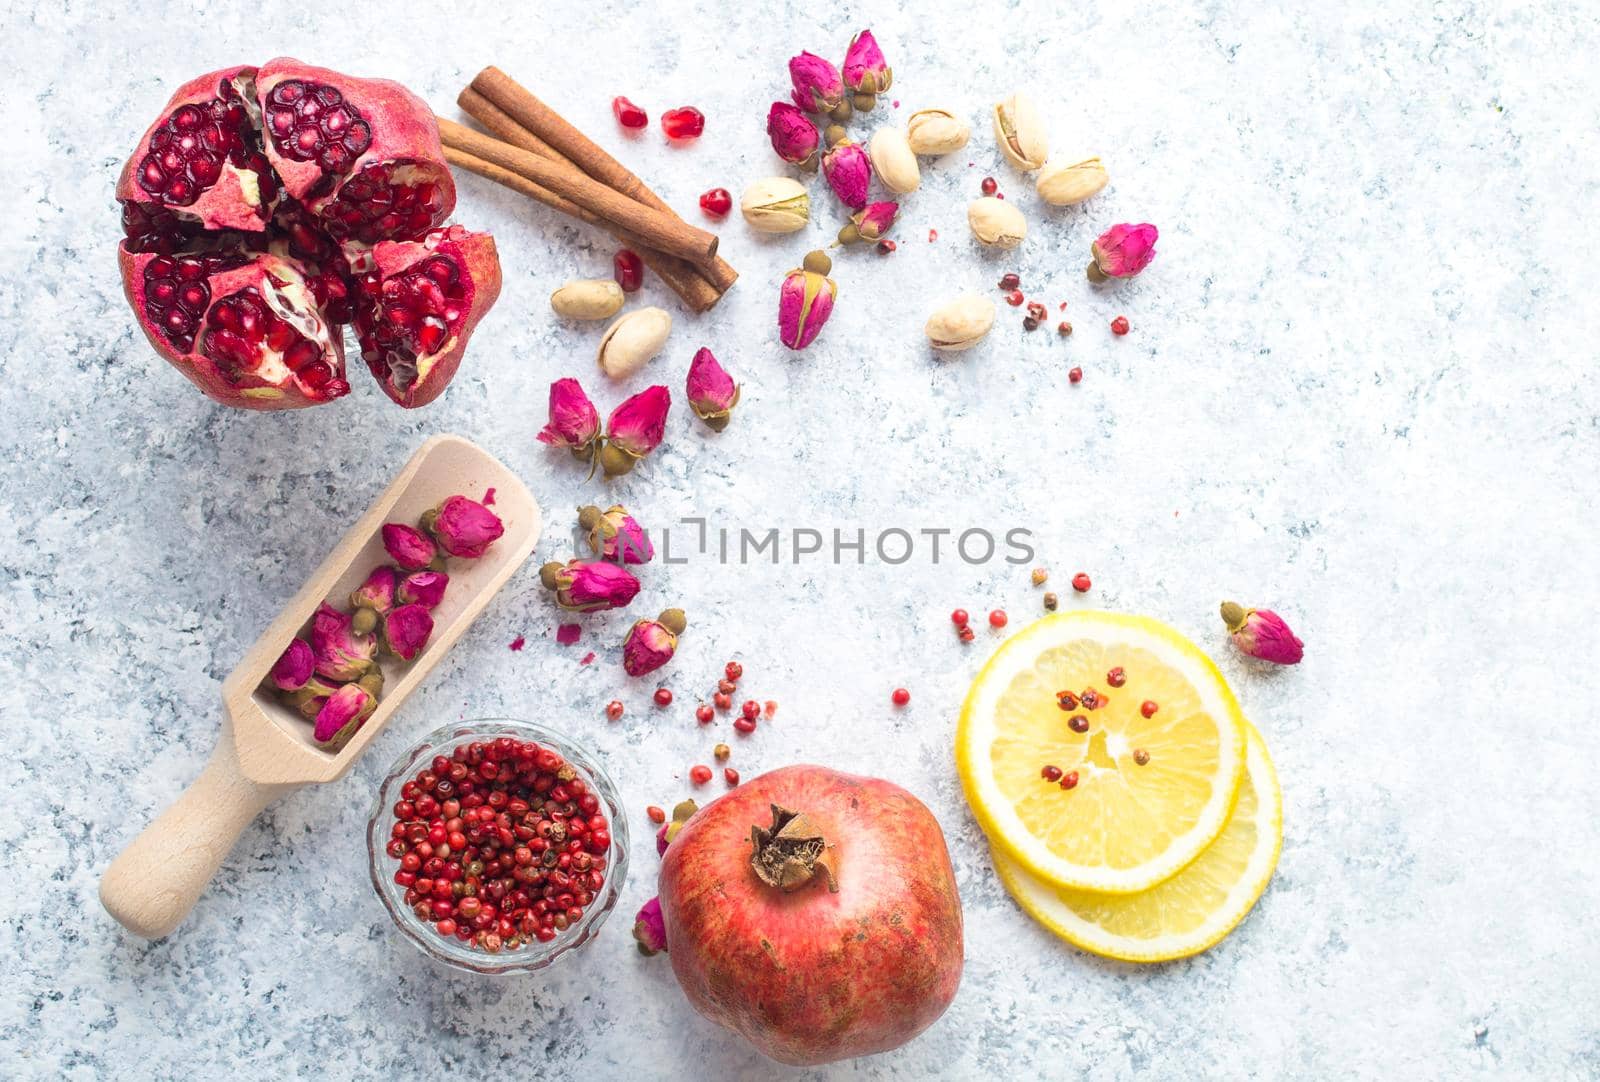 Arab ingredients, middle eastern food. Space for text. Arabic cuisine ingredients, white concrete background. Rose buds, spices, pomegranate, lemon. Halal food making. Top view. Arab food concept